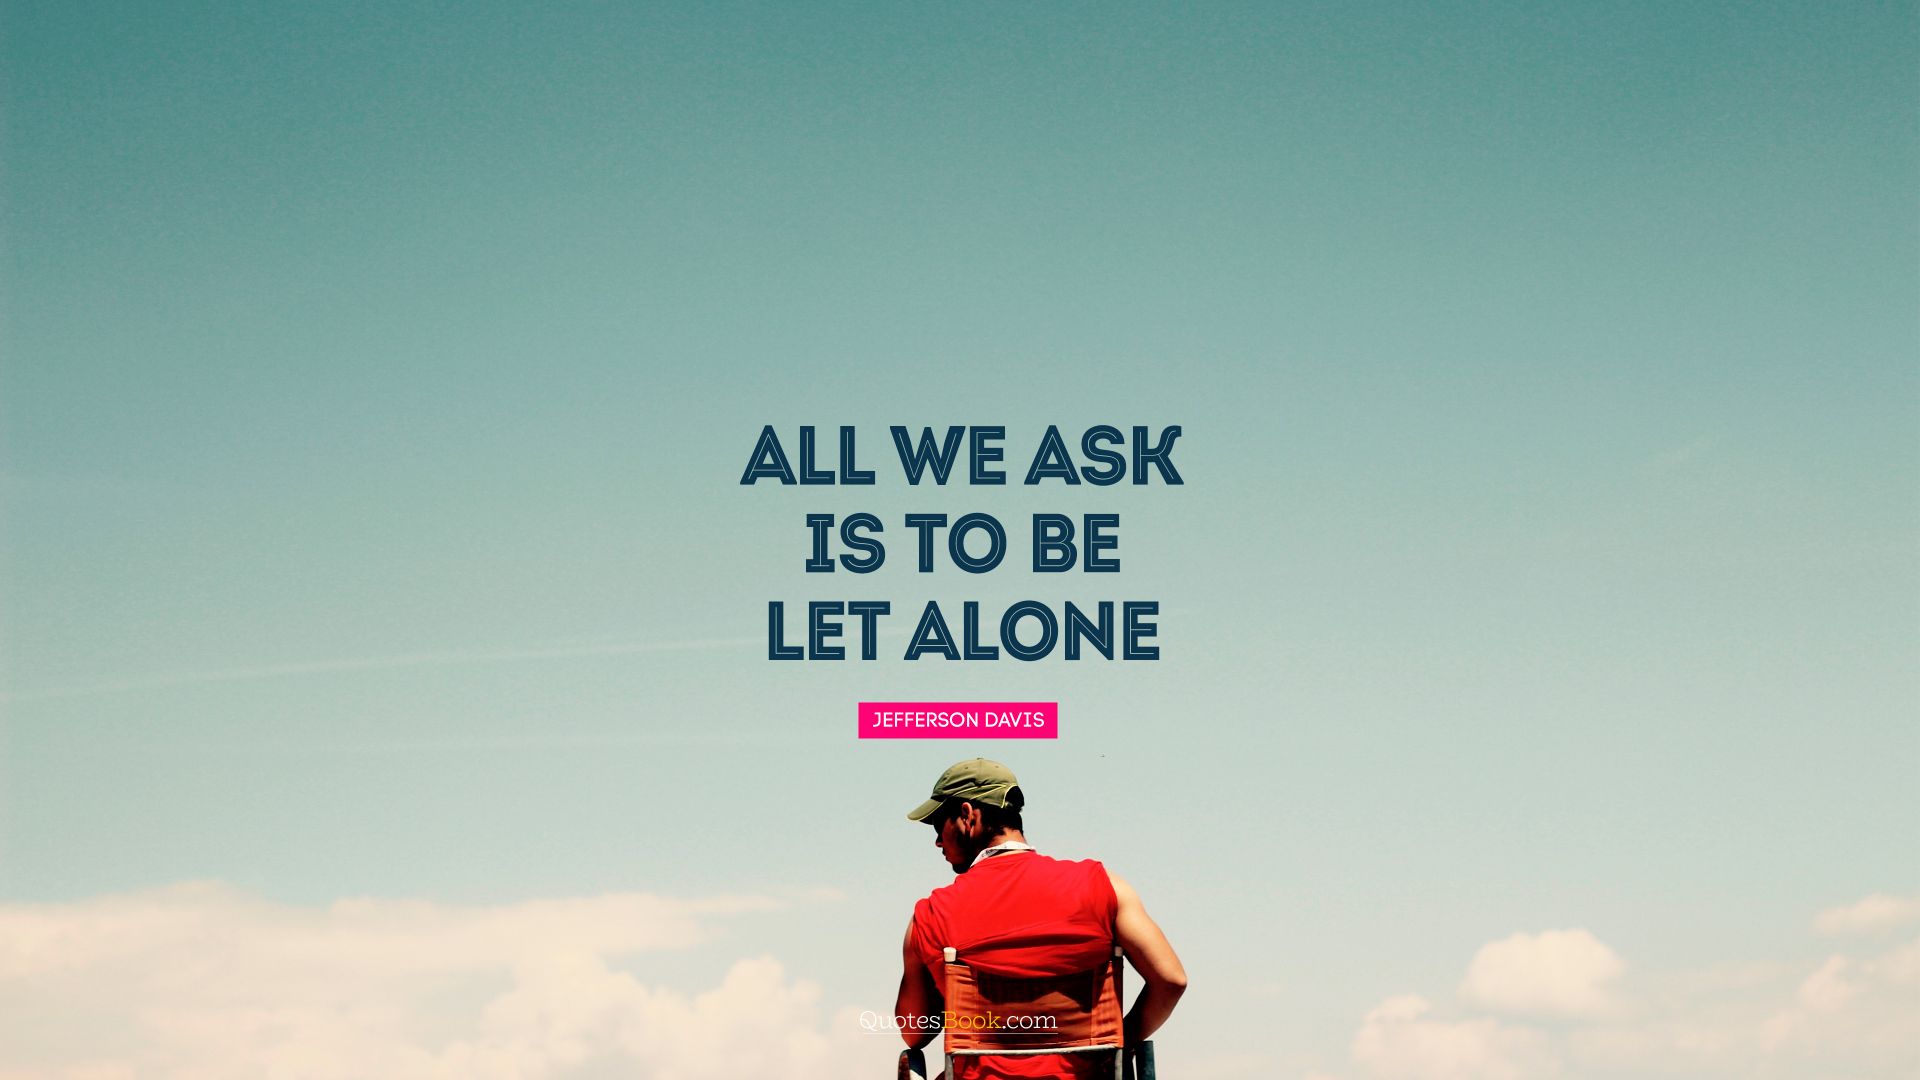 All we ask is to be let alone. - Quote by Jefferson Davis